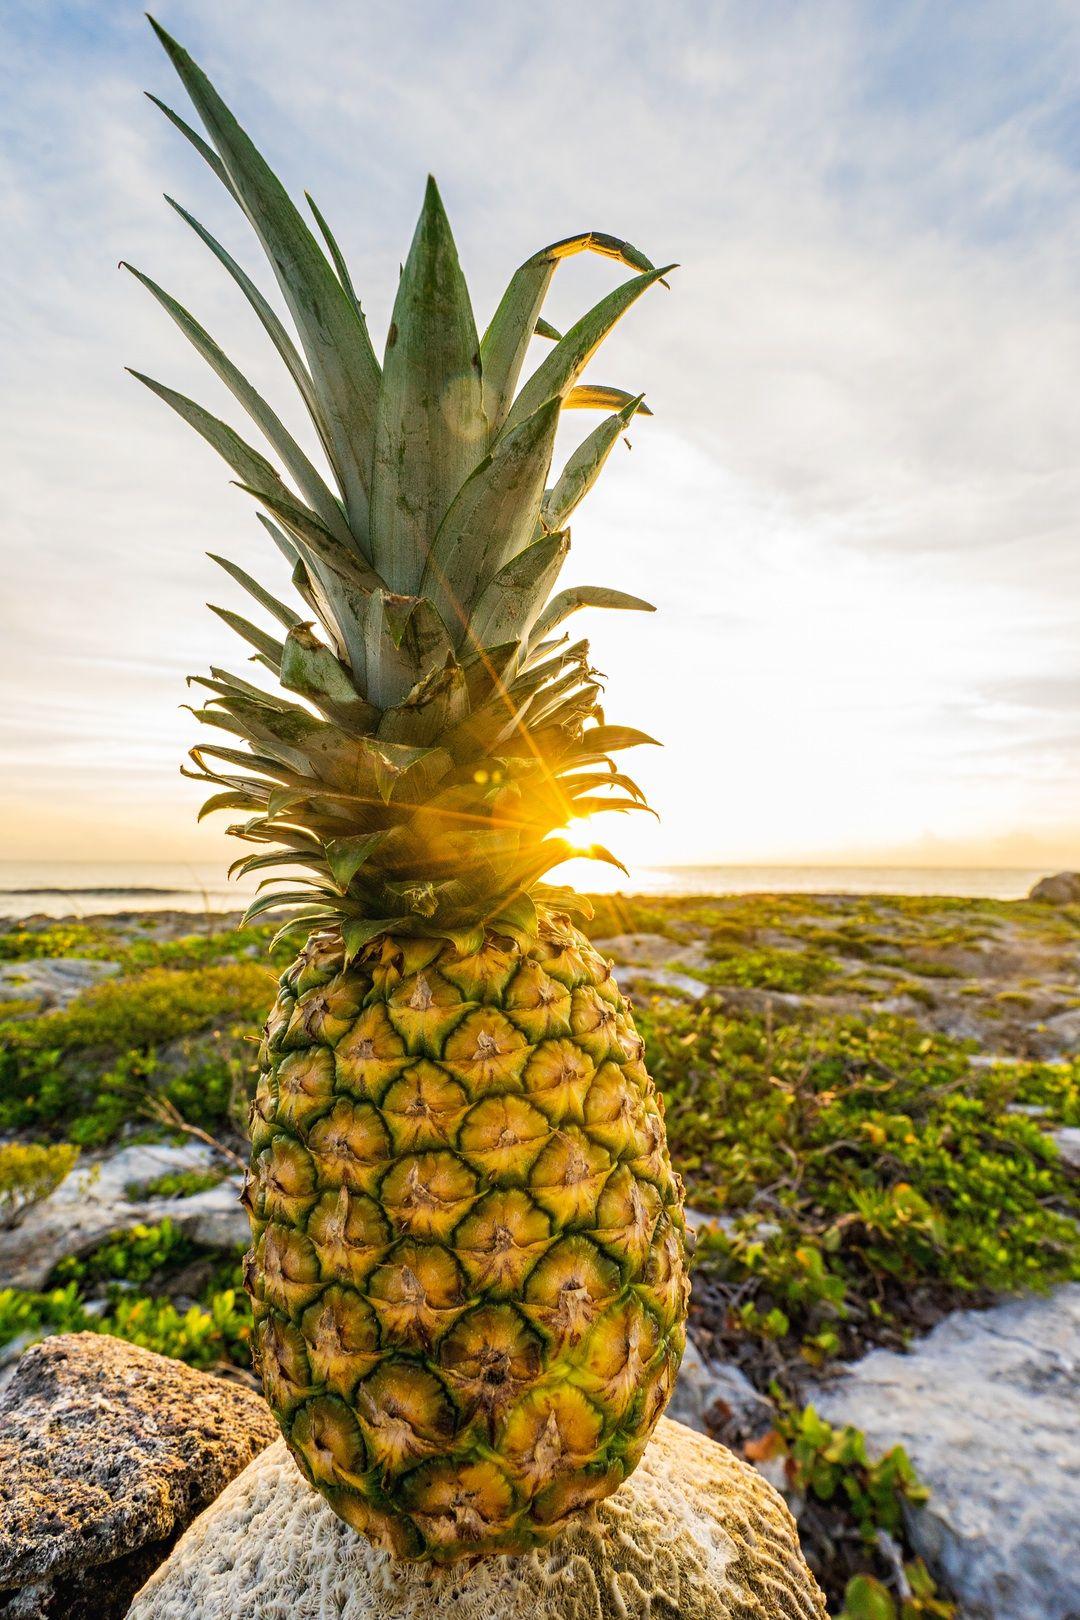 Free pineapple photography. Pineapples. Pineapple picture